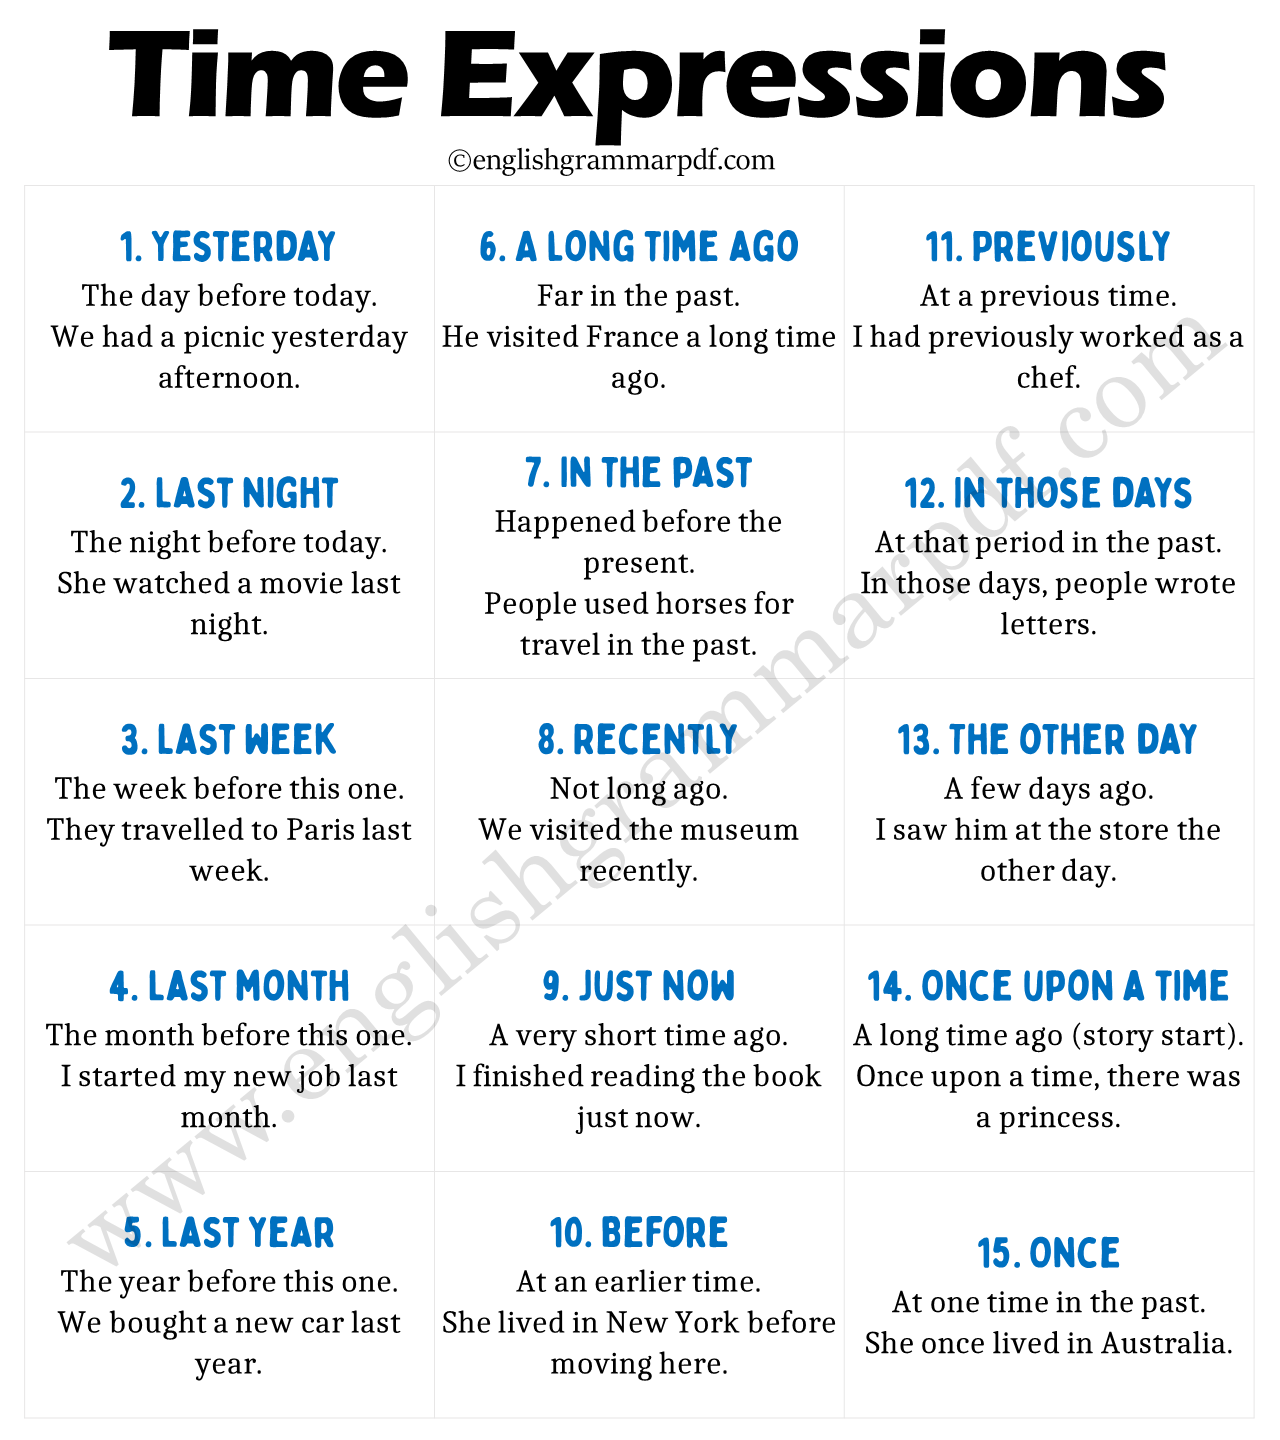 Time Expressions